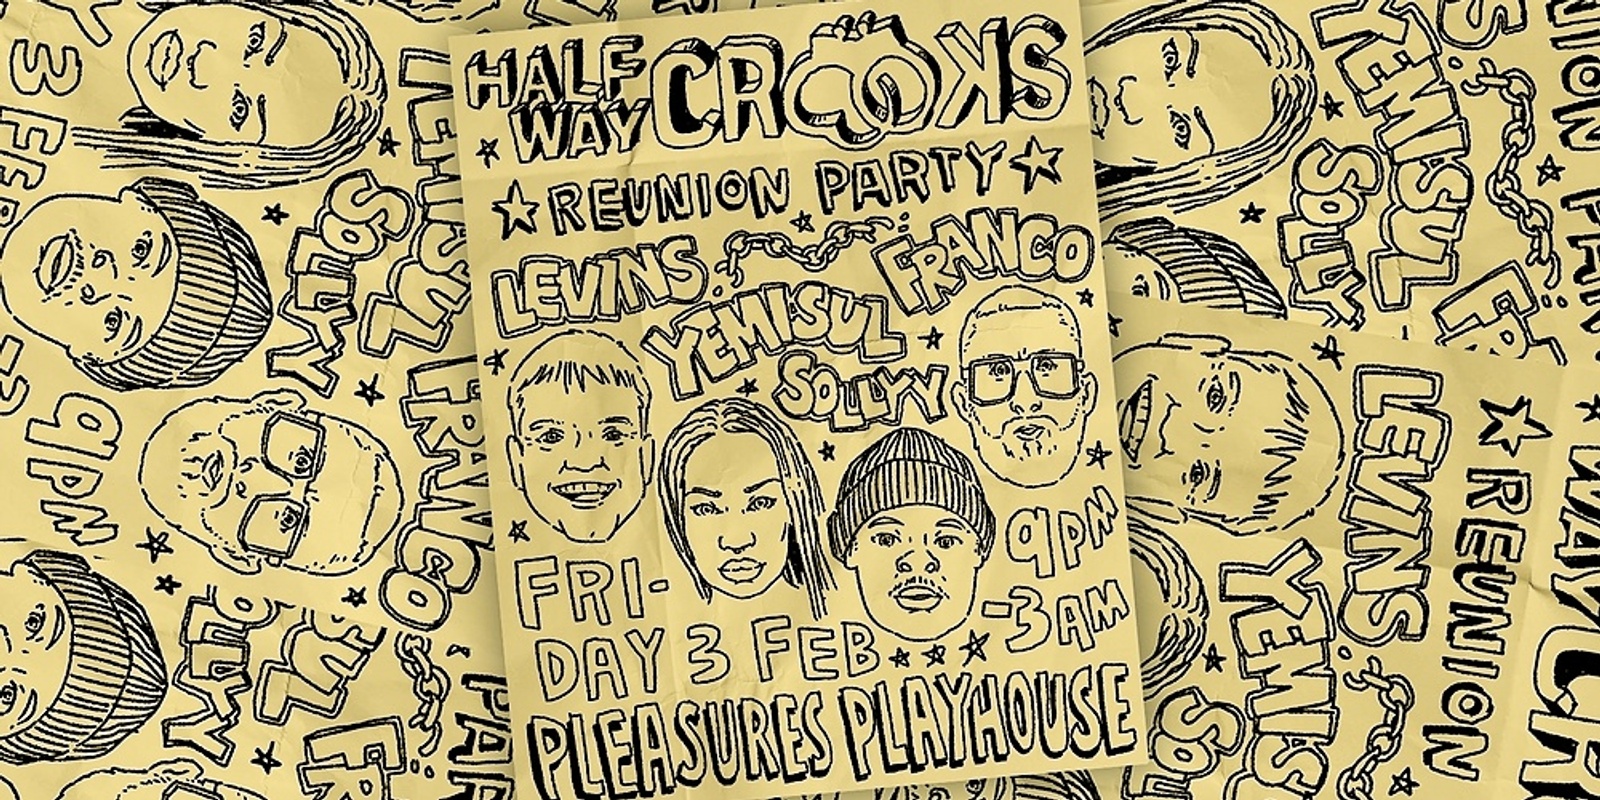 Banner image for Halfway Crooks Reunion Party 